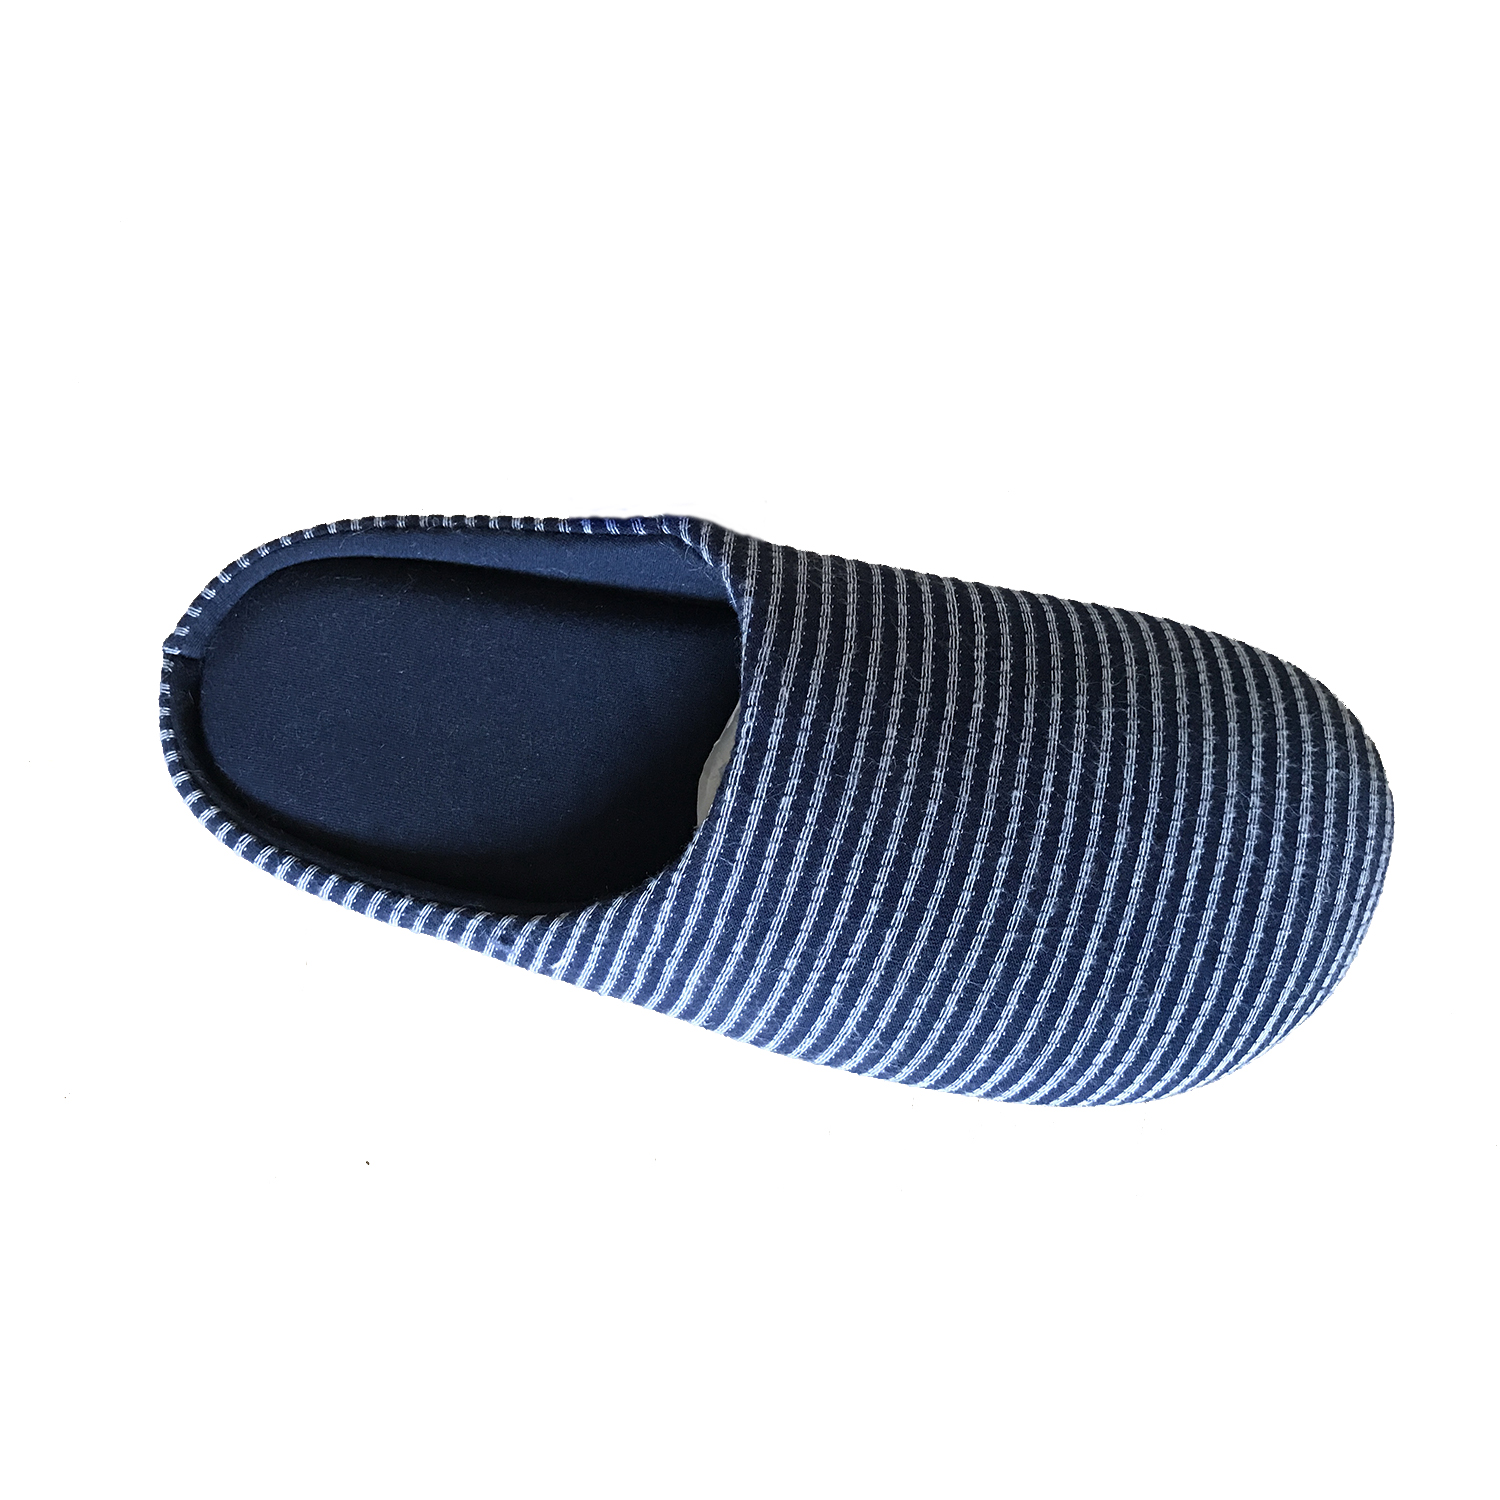 Men's Slippers Memory Foam Slippers Comfort Cotton-Blend Closed Toe House Shoes Indoor Scuff 